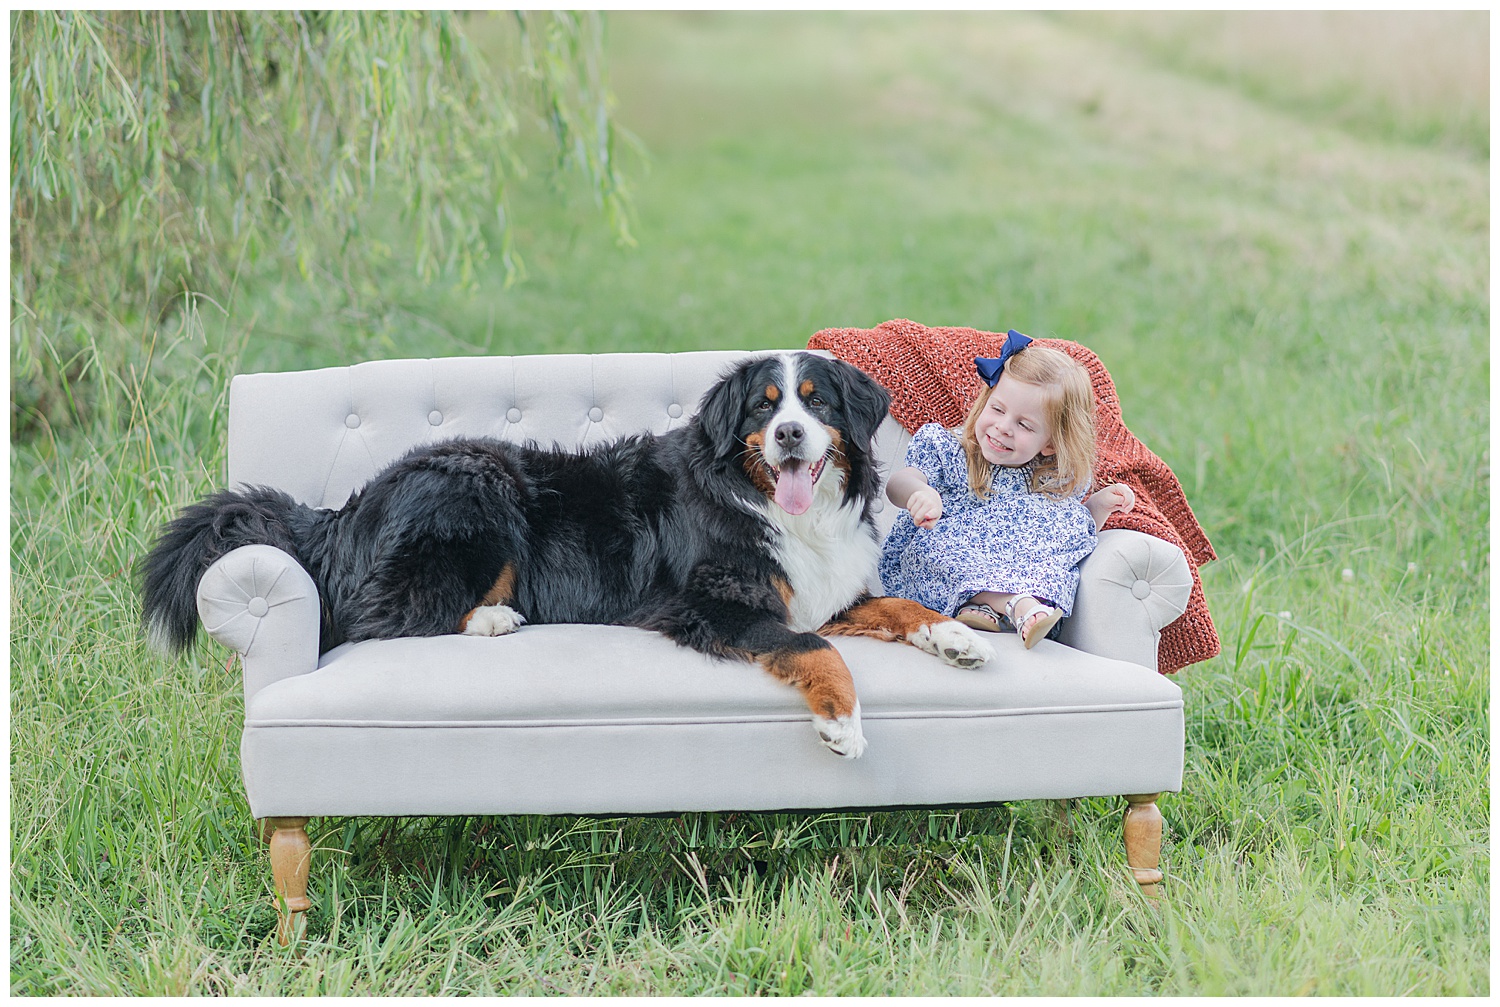 Photo Sessions with Children and dogs